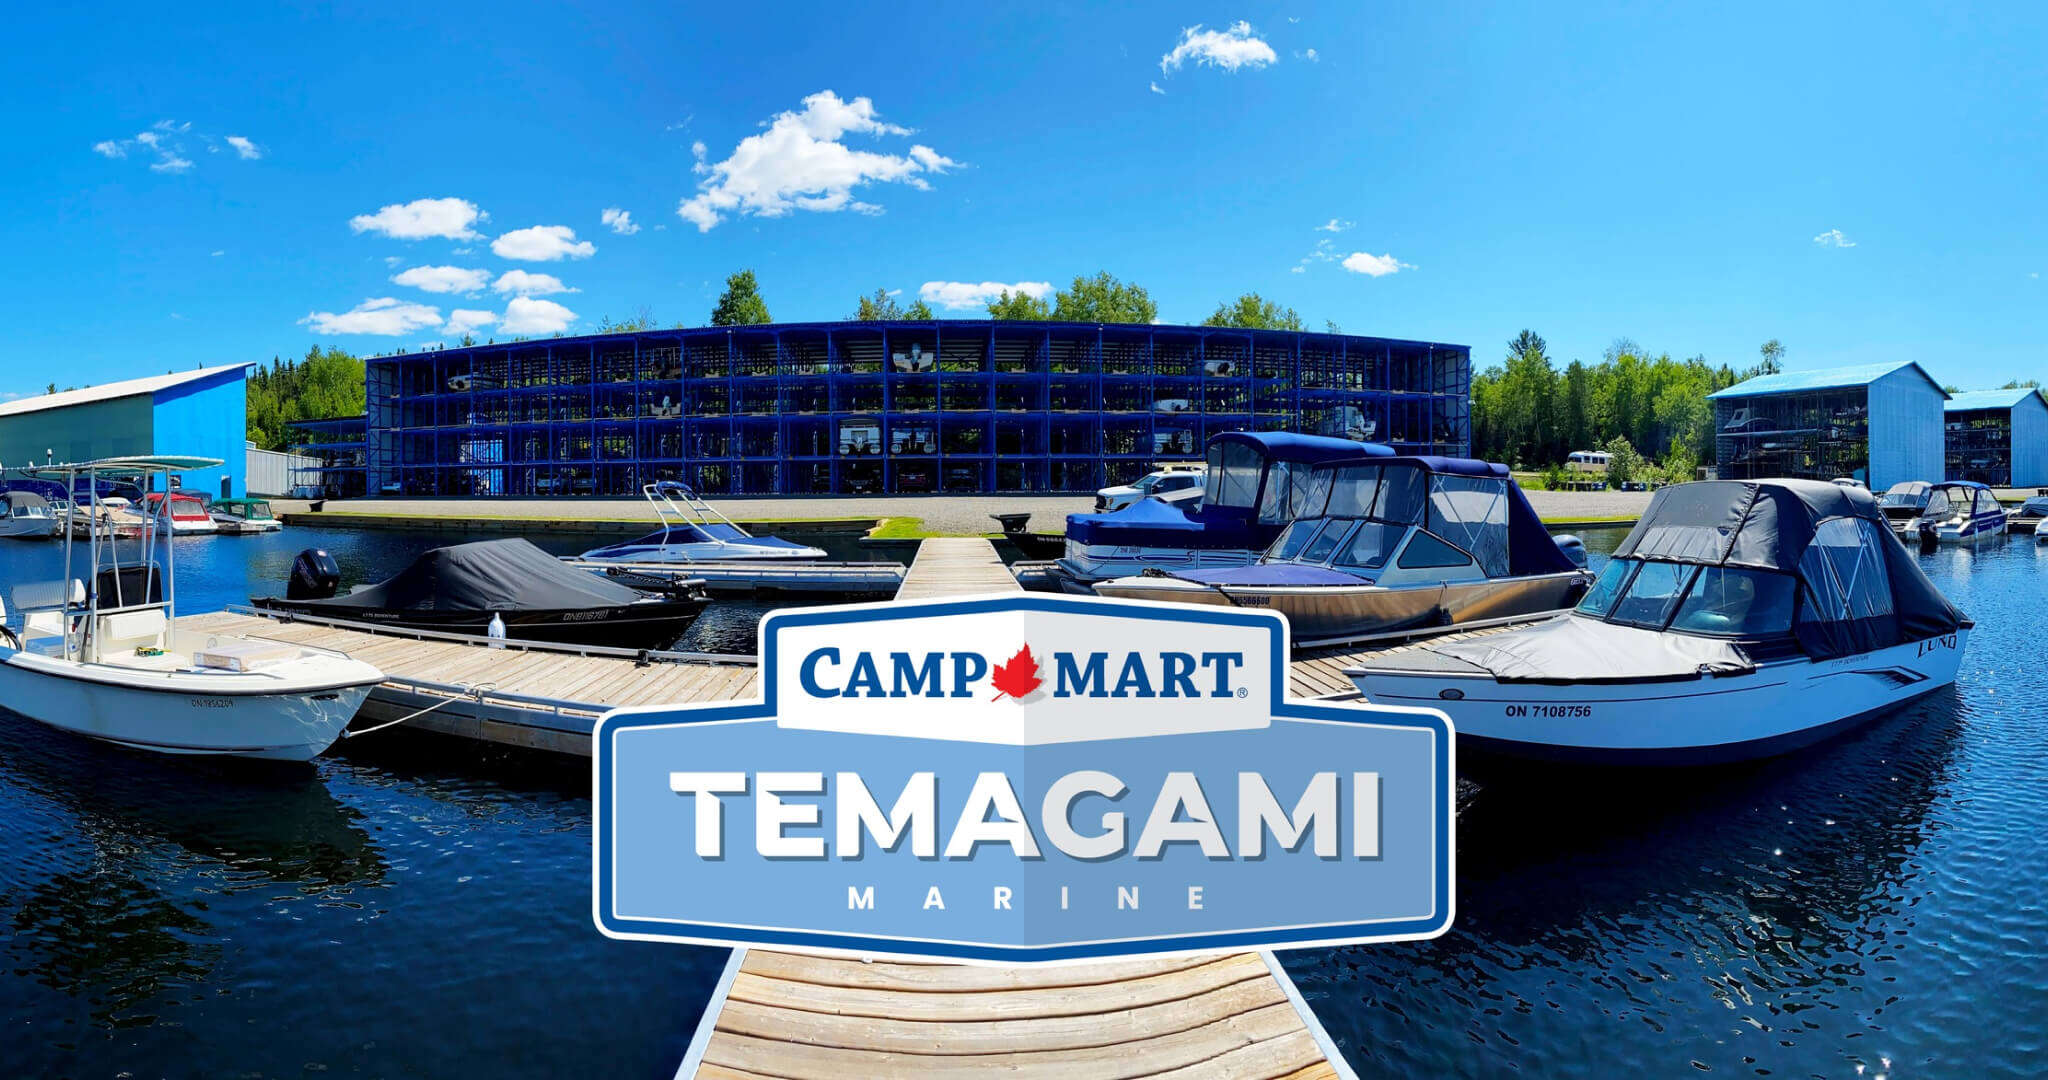 Welcome to Temagami Marine.